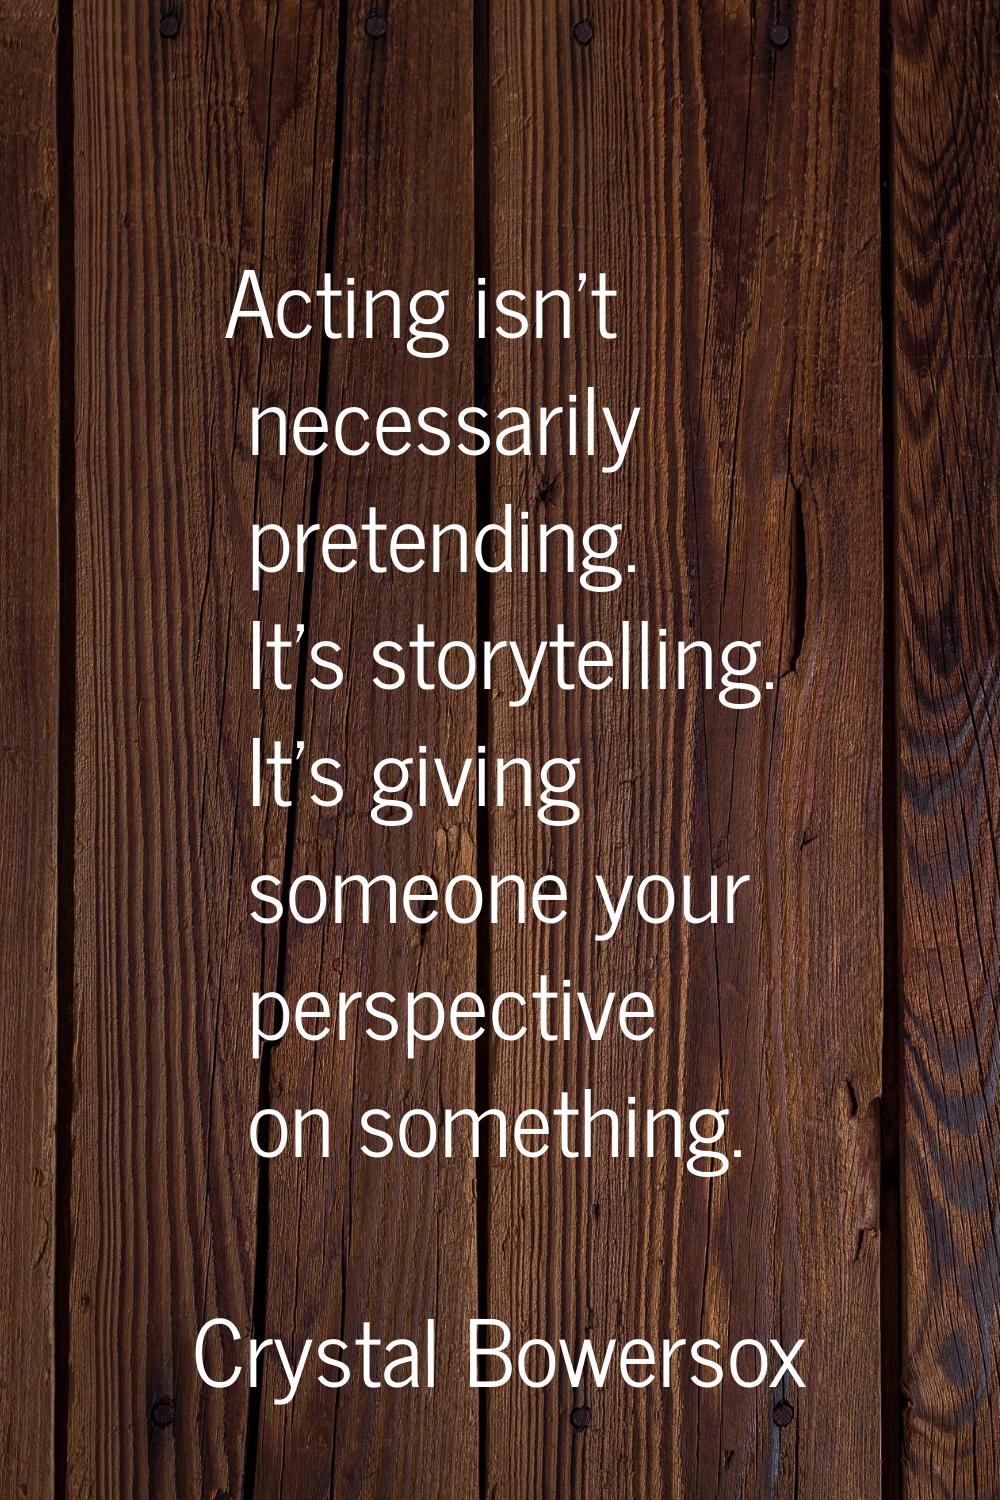 Acting isn't necessarily pretending. It's storytelling. It's giving someone your perspective on som